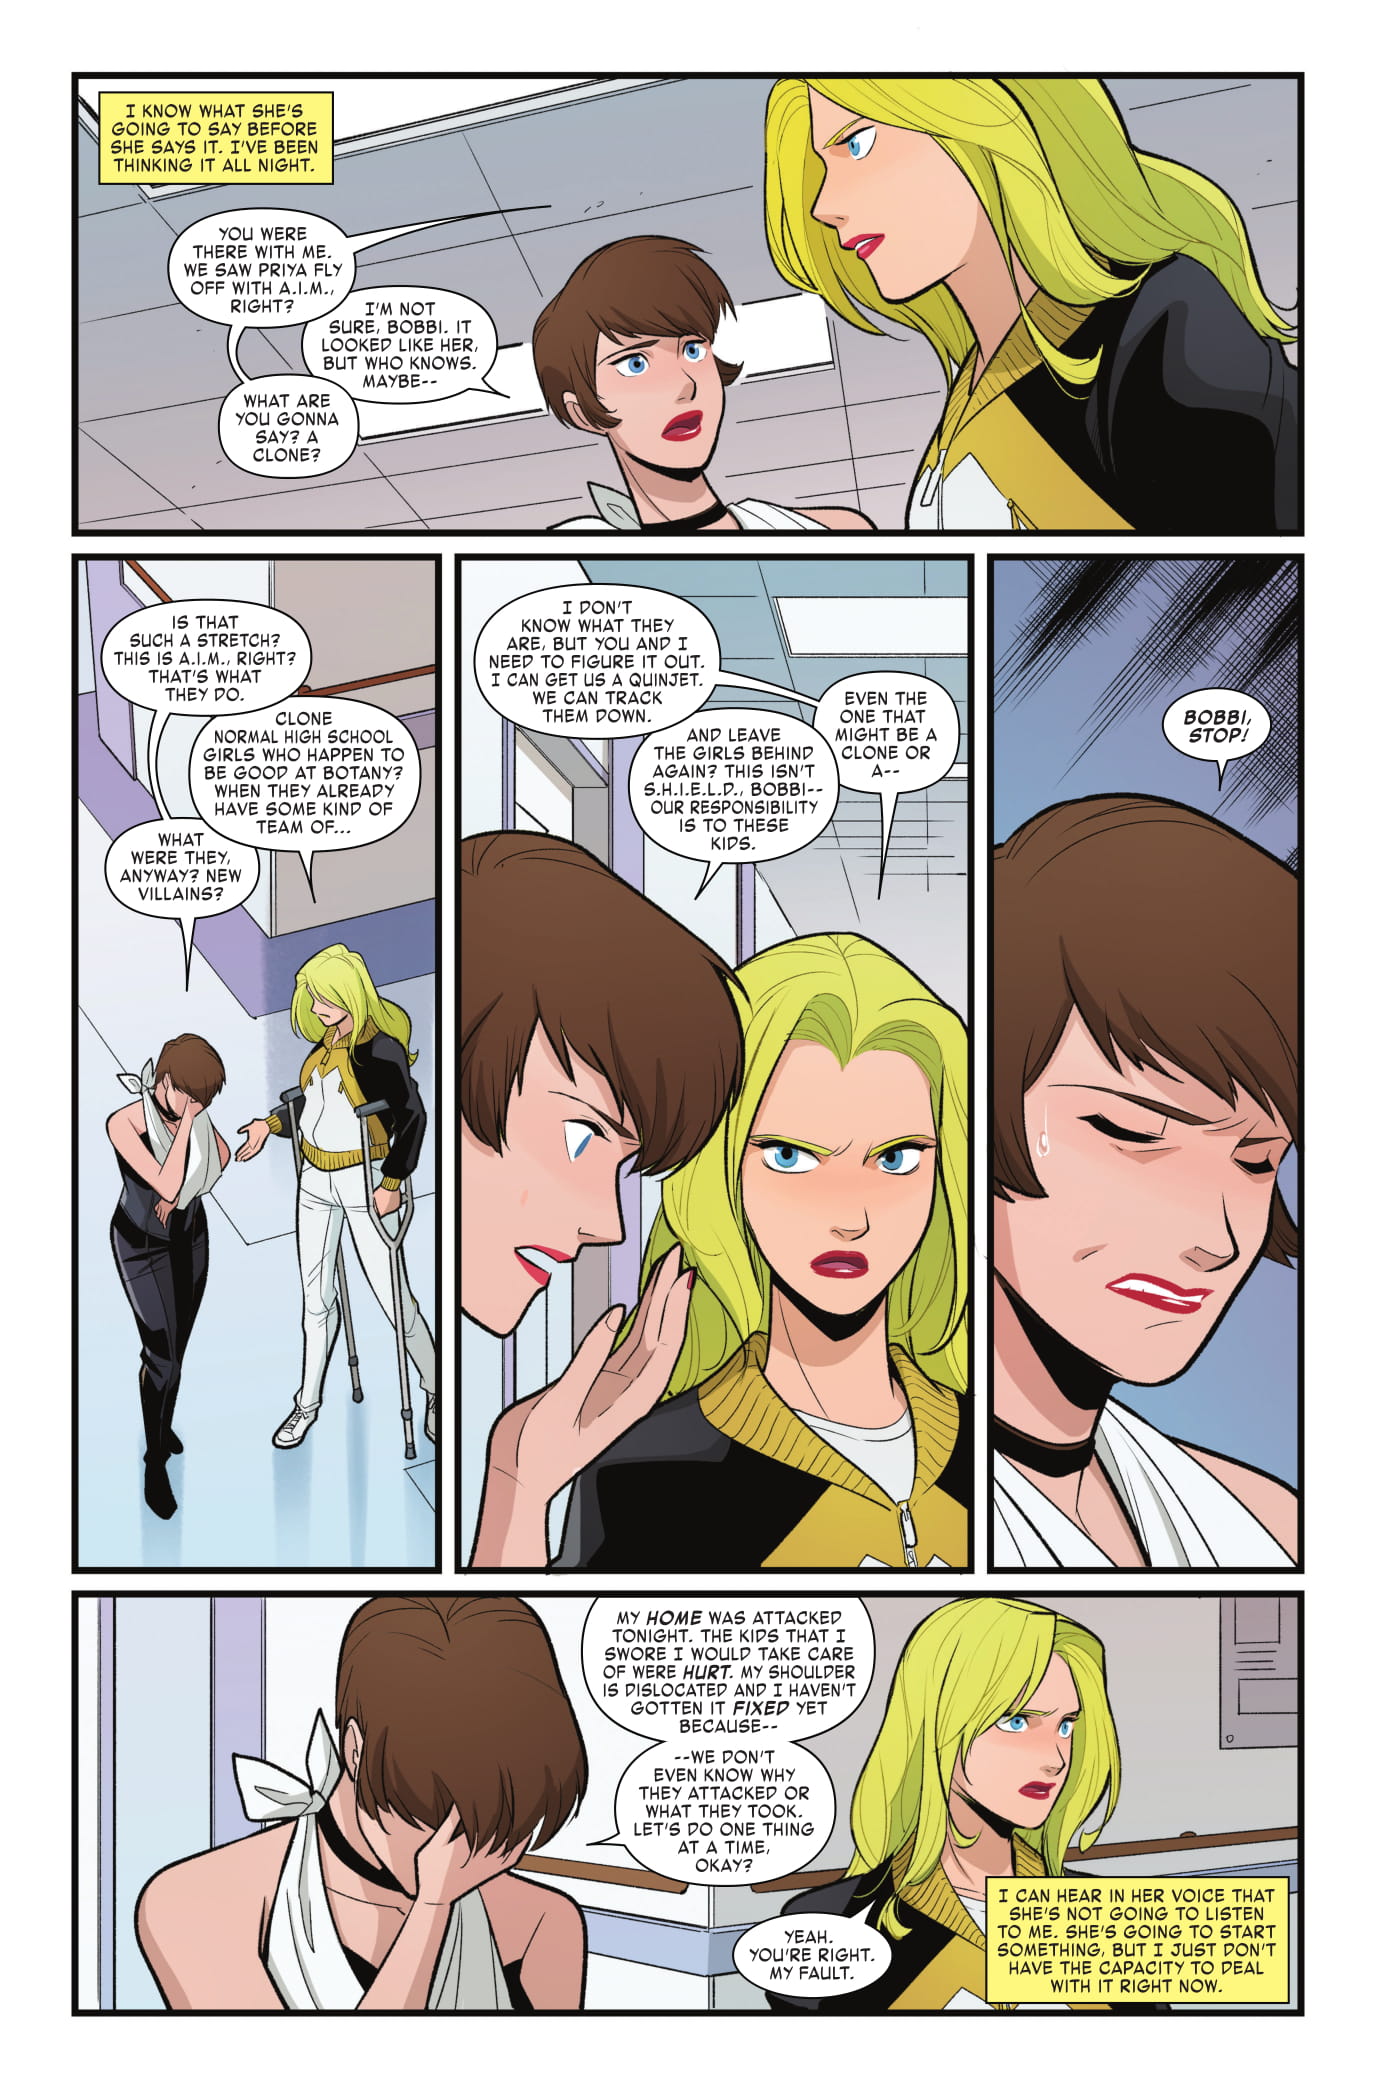 Unstoppable Wasp #4 Page 4